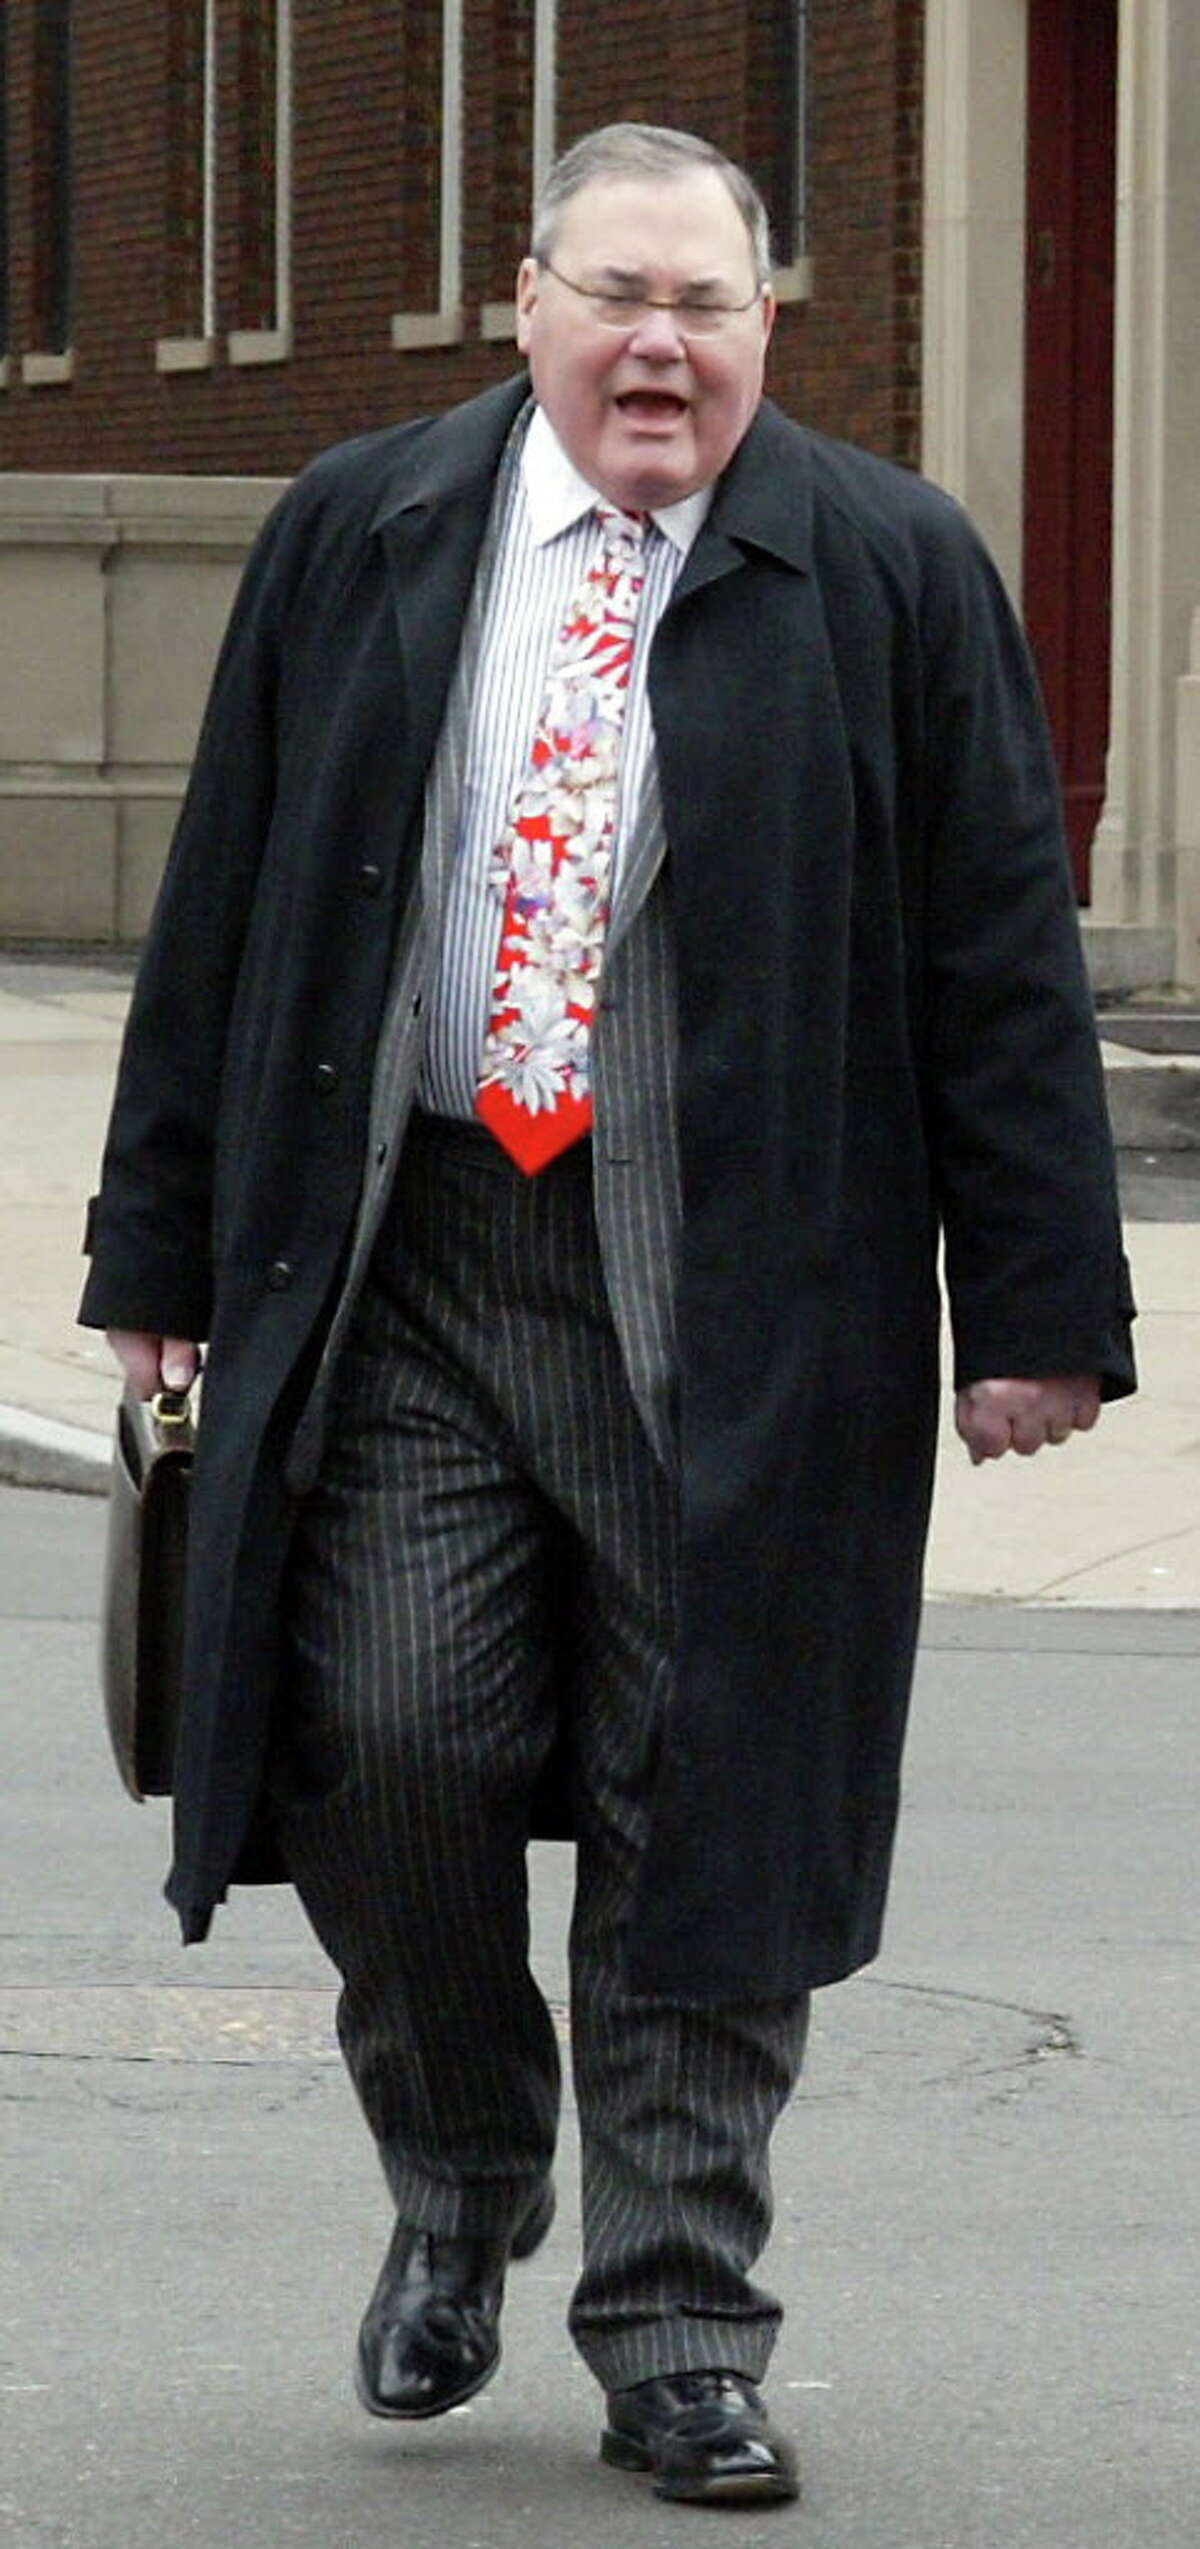 Former Connecticut U.S. Attorney Harold J. Pickerstein of Fairfield is shown at federal court in Hartford in this file photo.